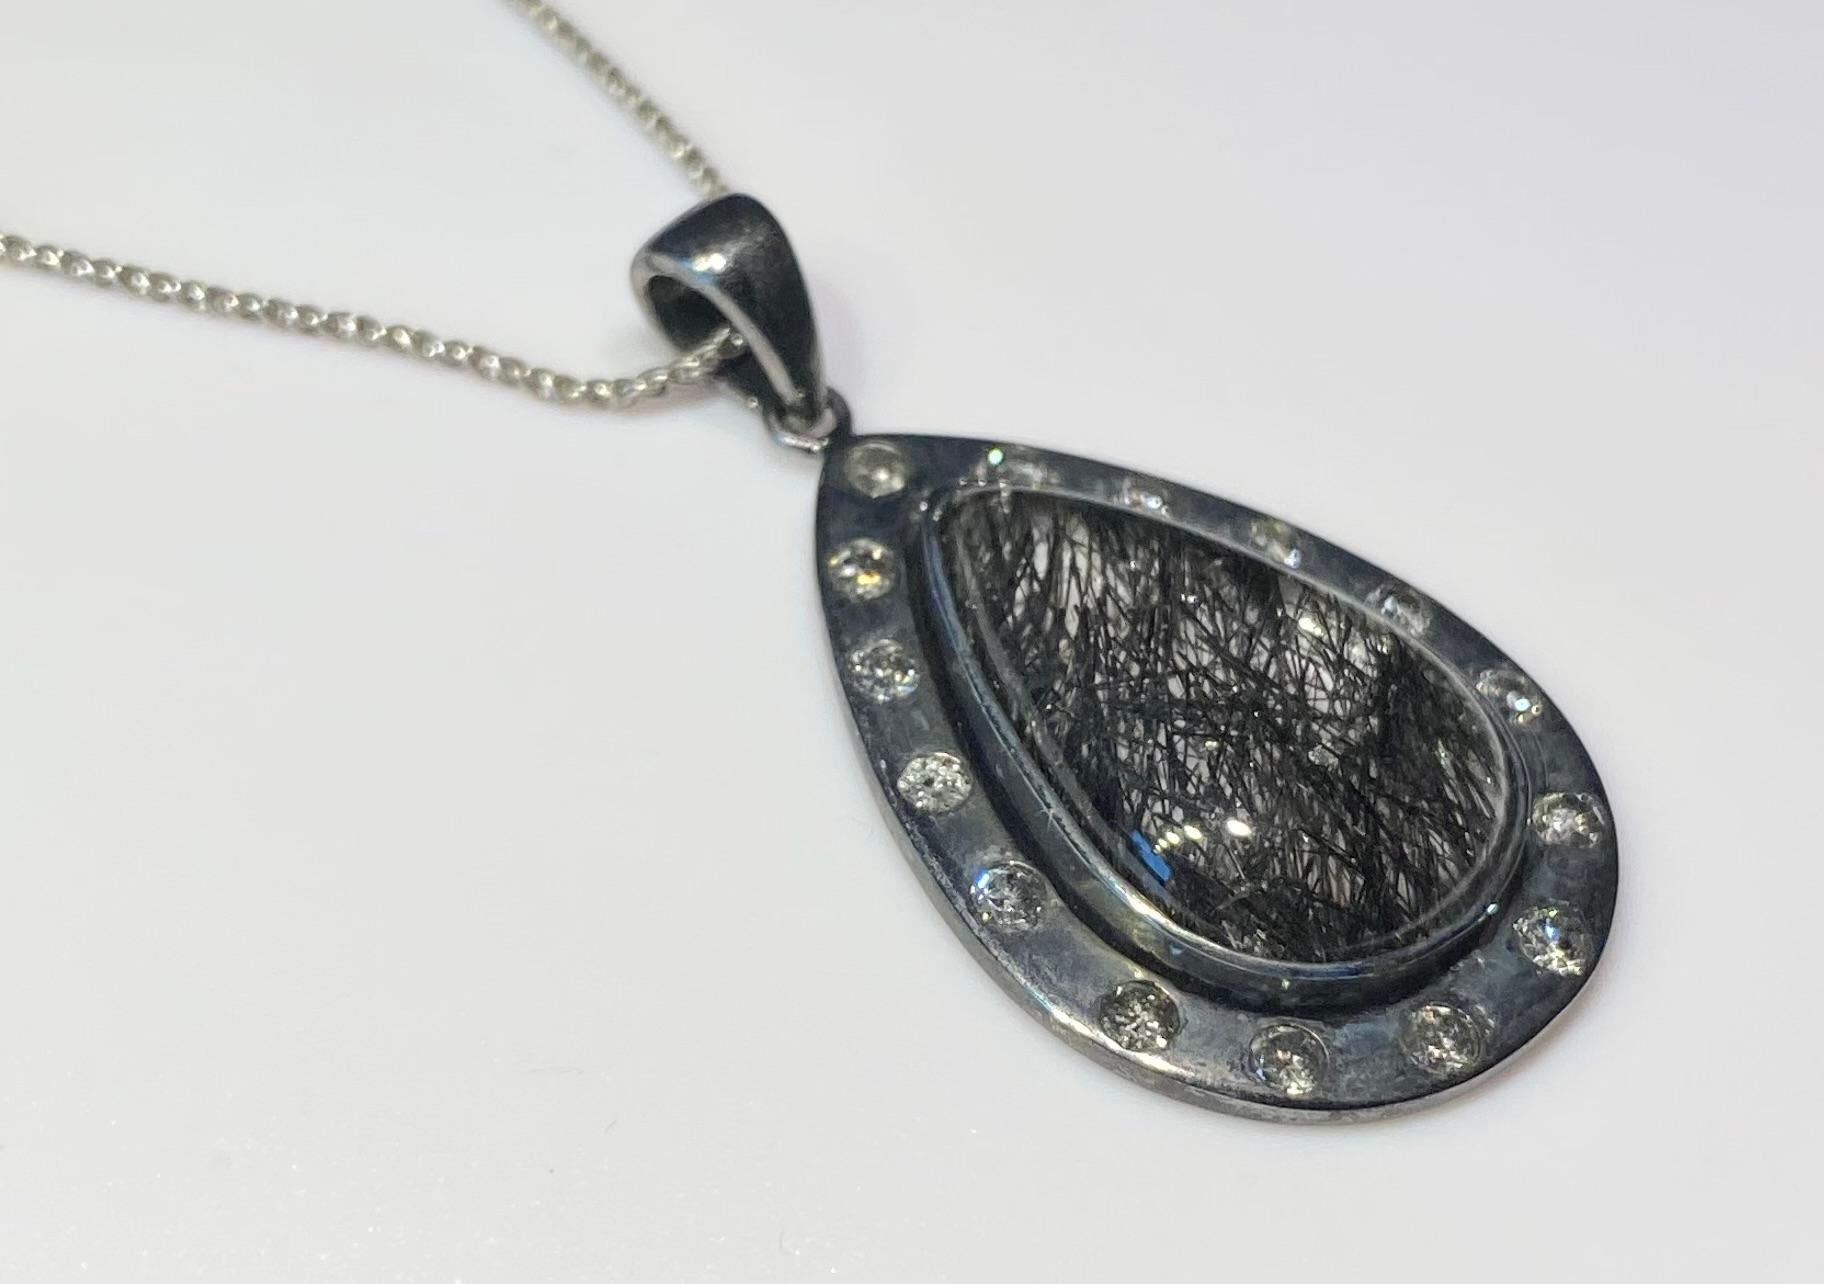 A Champagne Diamond & Quartz Cabochon Pendant, set in darkened Silver.
This Pendant features a central Pear shaped Graphitite Cabochon (Quartz with Graphite Needles) of 27 Carats, surrounded by 15 Round Diamonds which are SI quality and Tinted Grey.